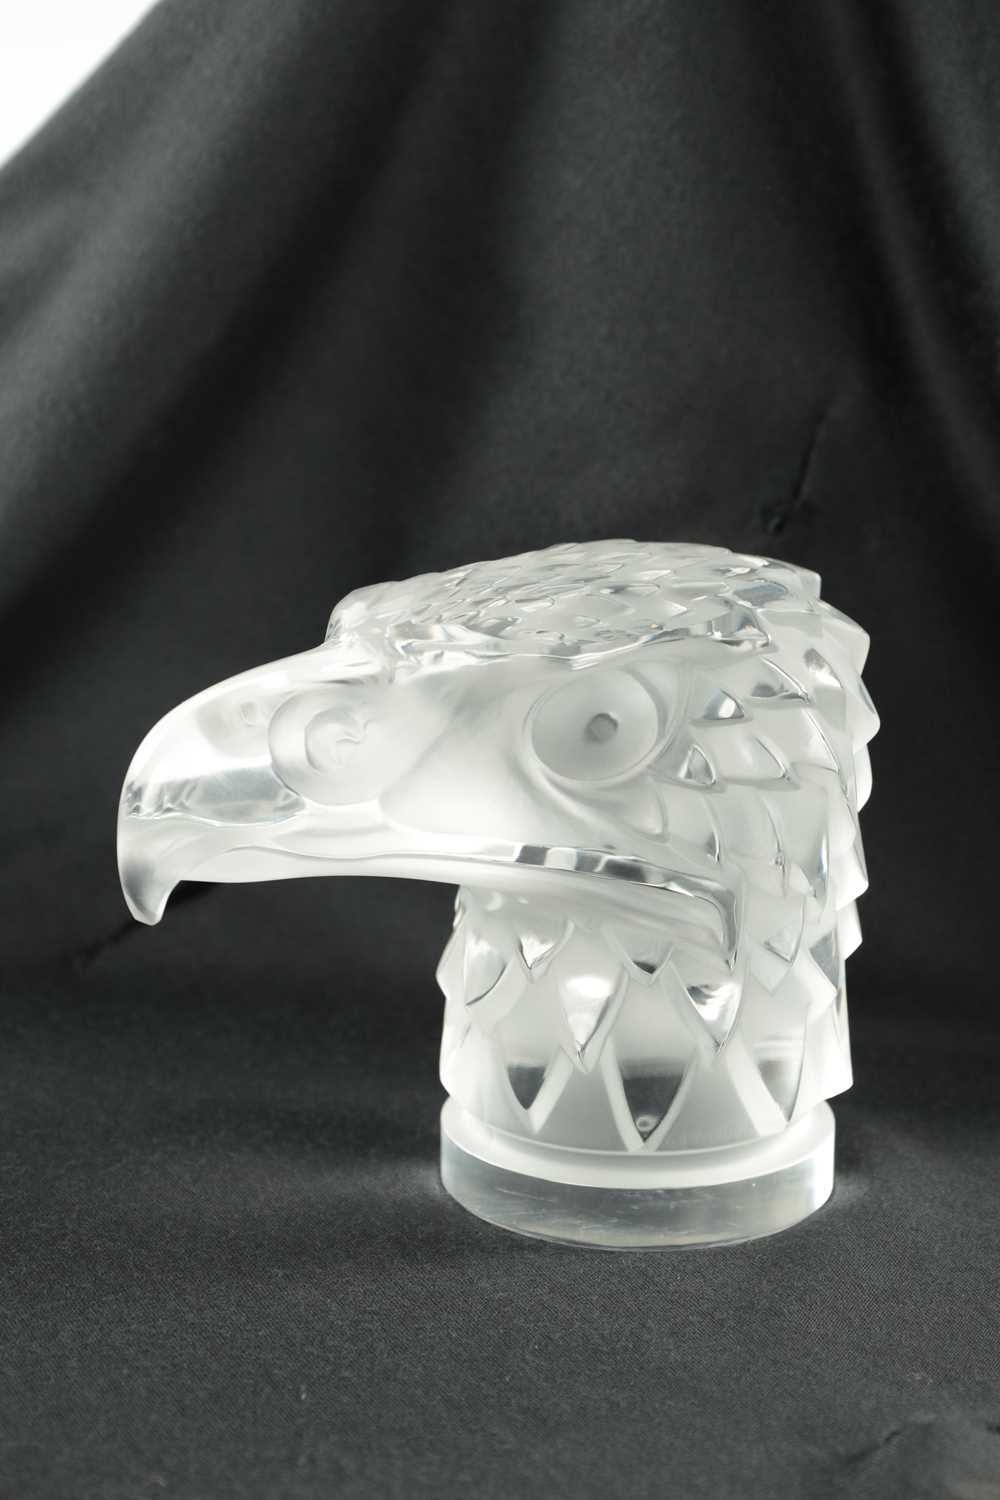 A RENE LALIQUE 'TETE D'AIGLE' CLEAR AND FROSTED GLASS CAR MASCOT - Image 2 of 12